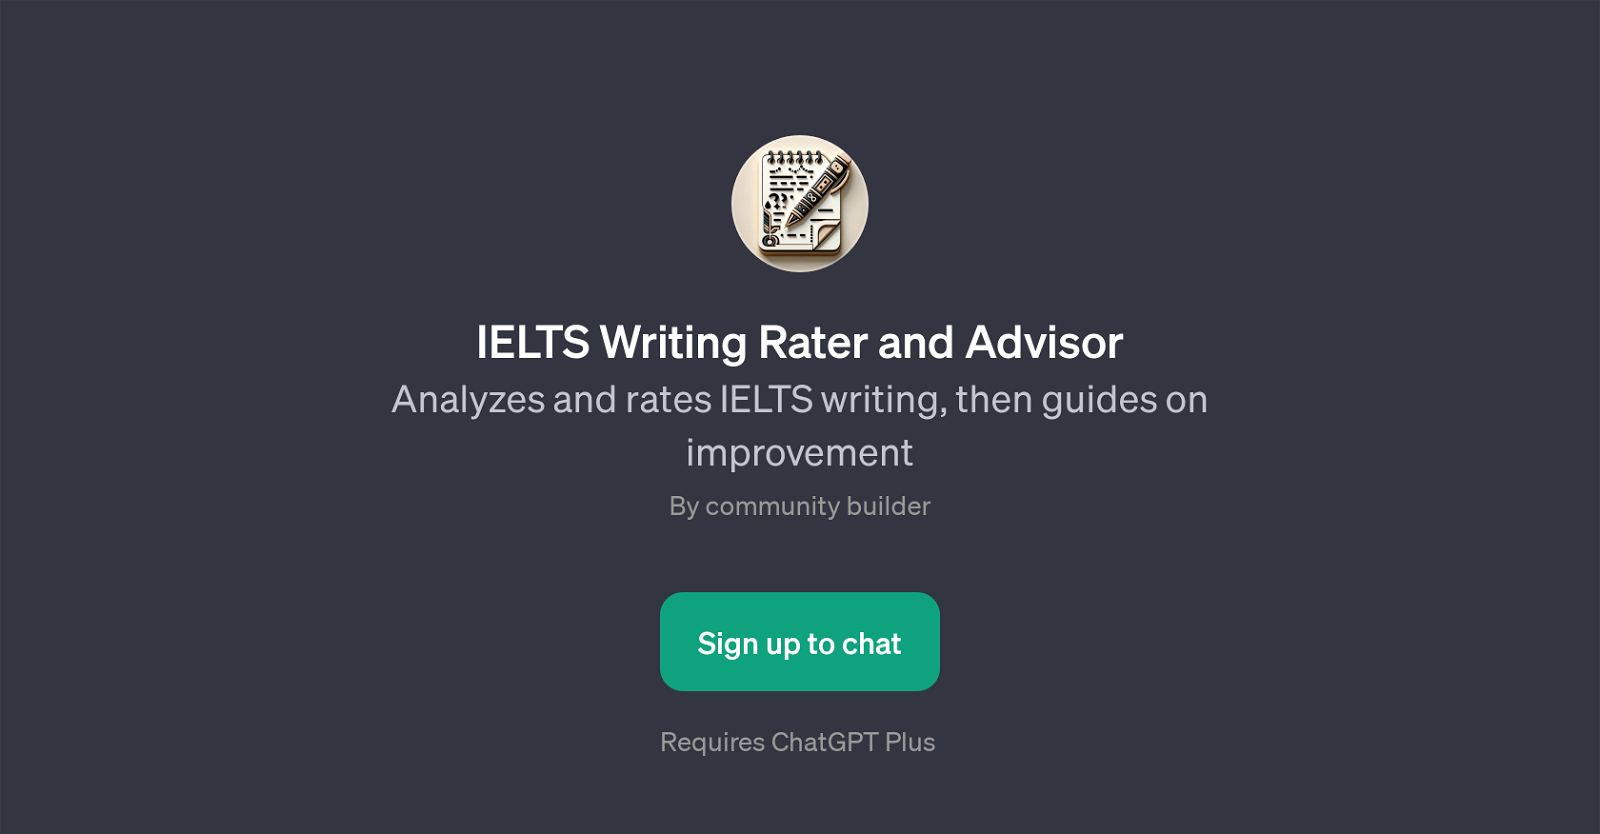 IELTS Writing Rater and Advisor website